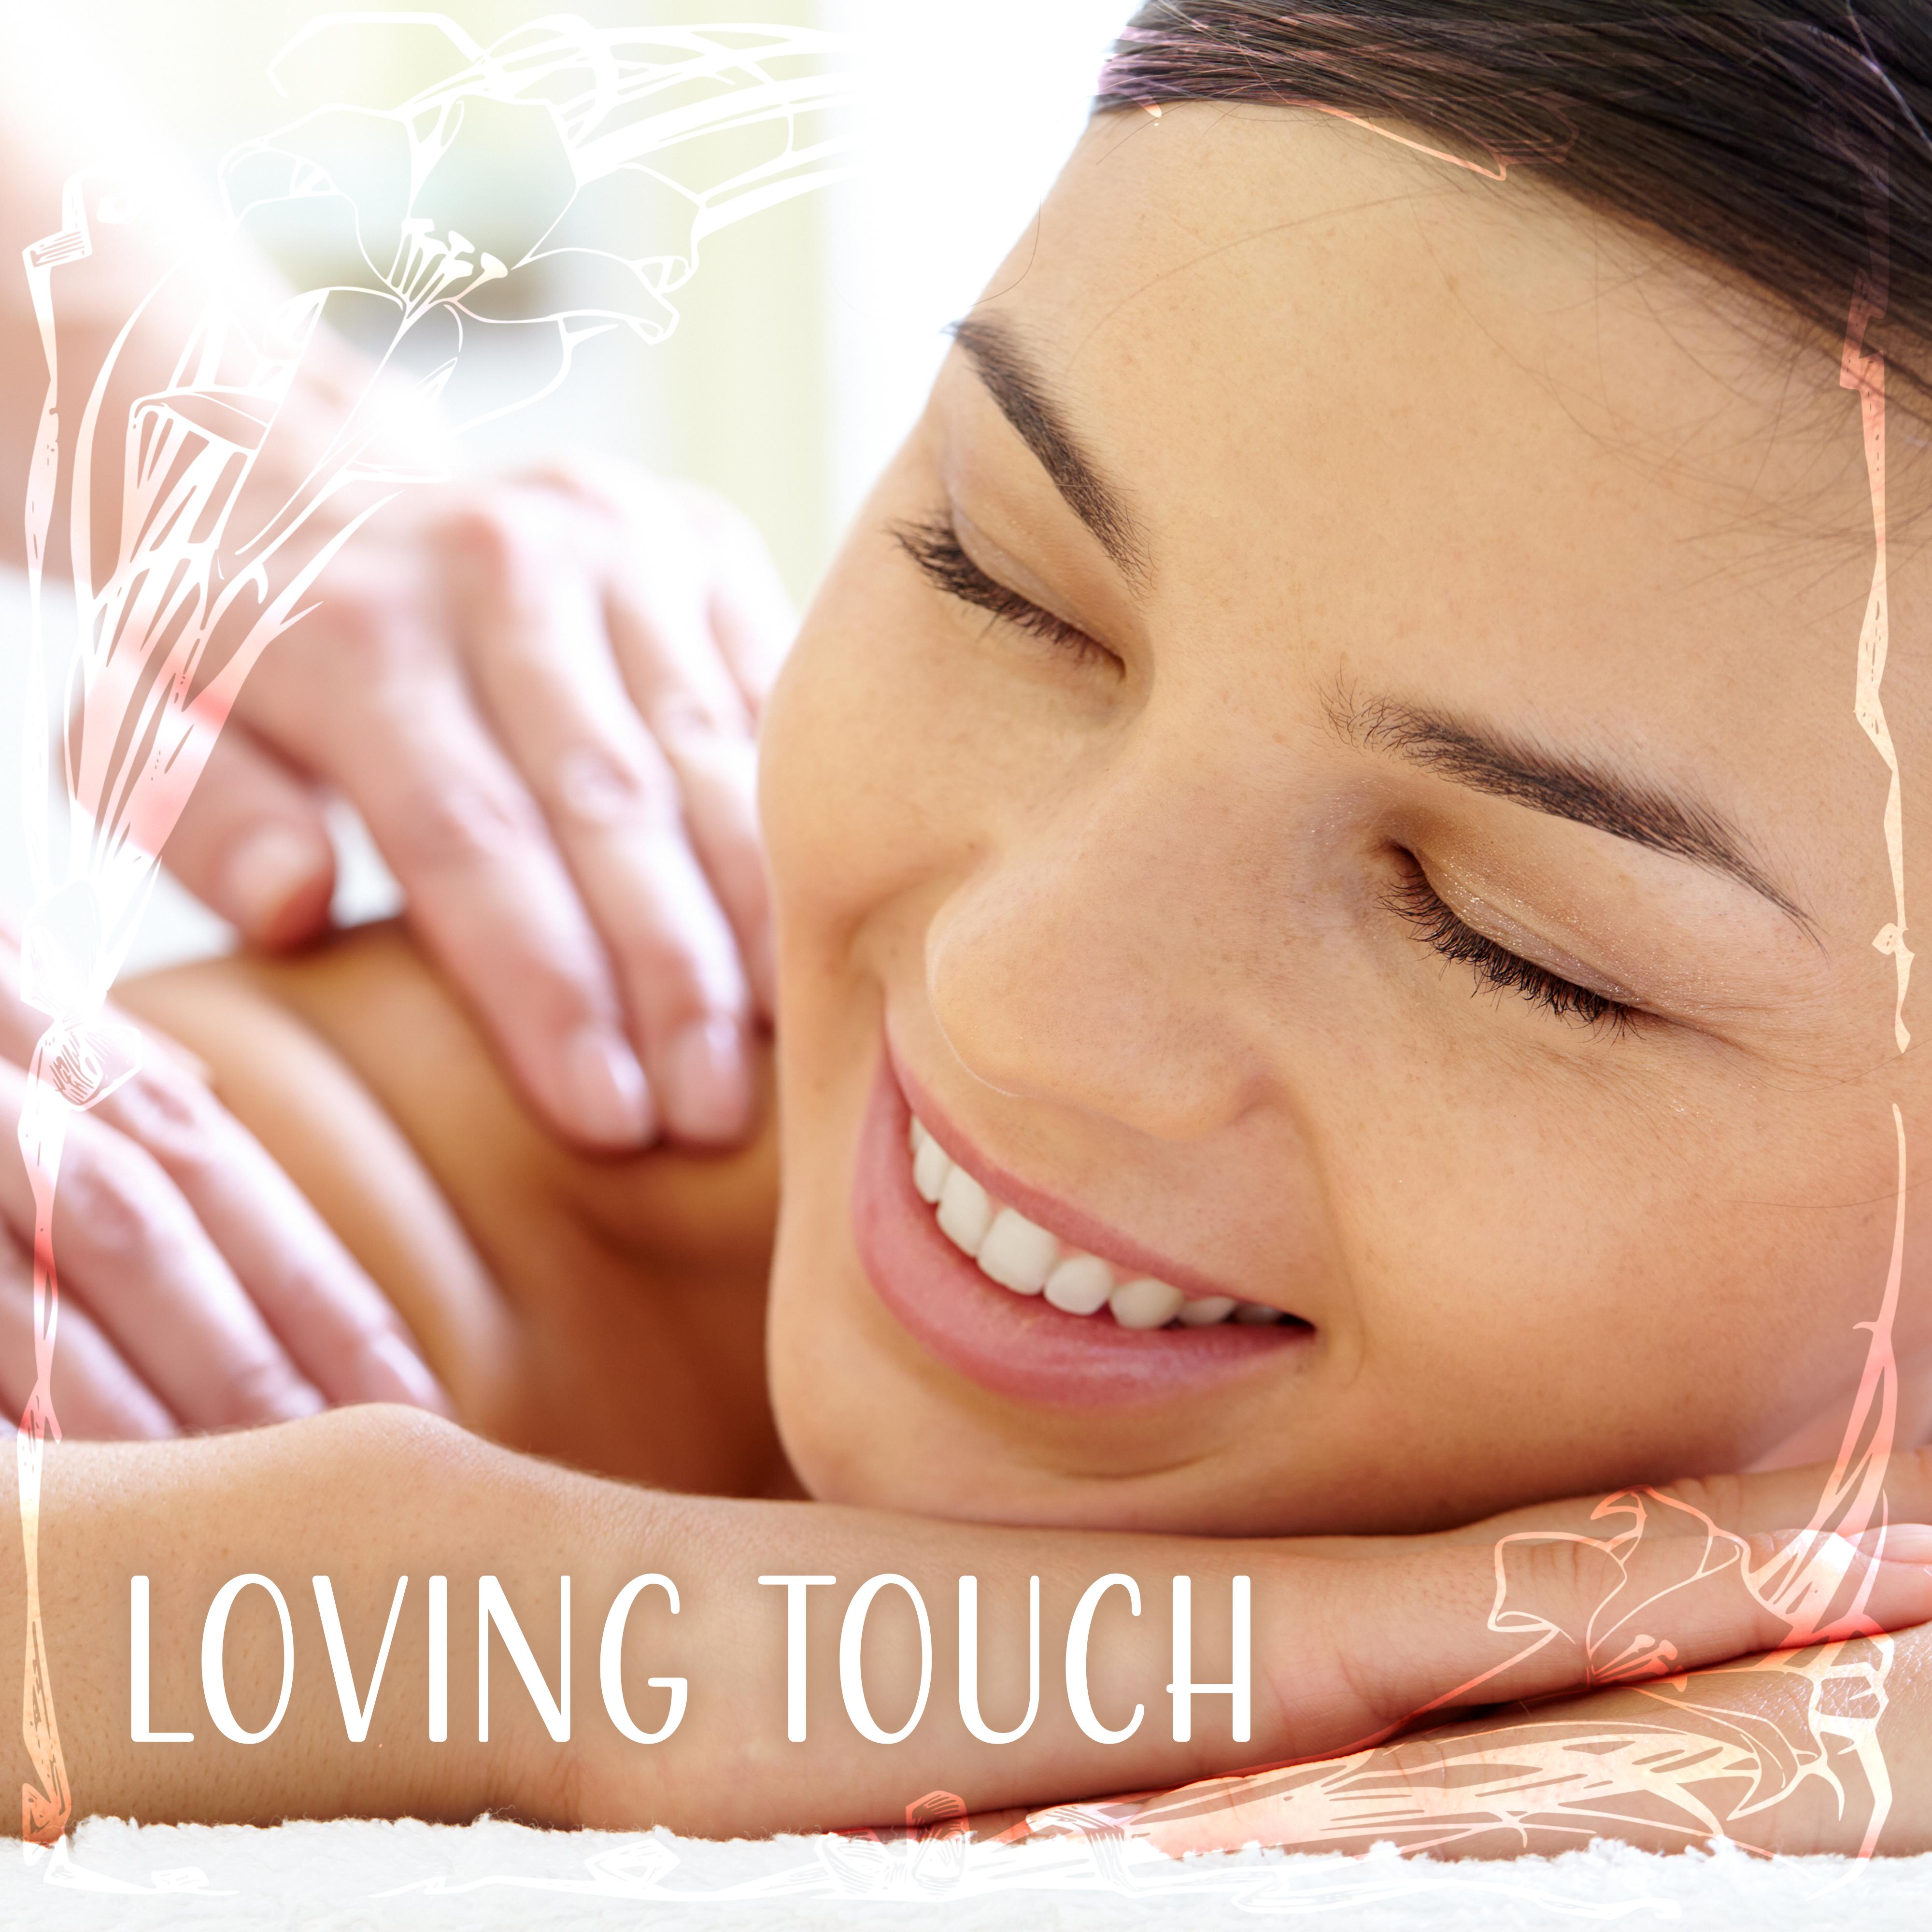 Loving Touch  Massage Music, Deep Relaxation, Spa, Healing Sounds of Nature, Spa Music, Pure Instrumental Sounds, Birds and Water